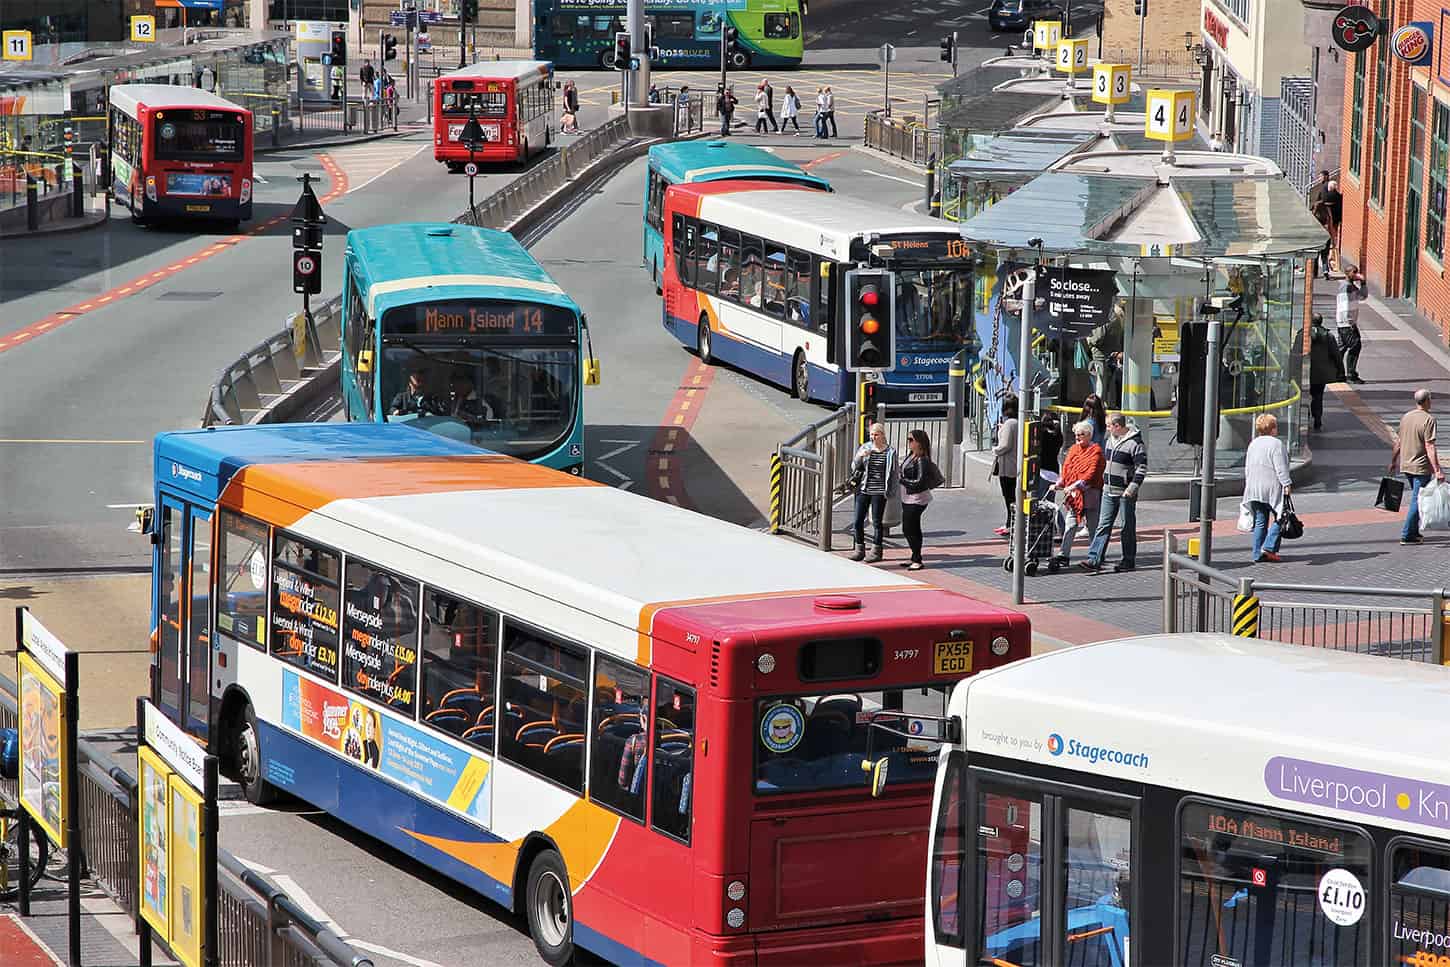 A number of local buses waiting at a red light